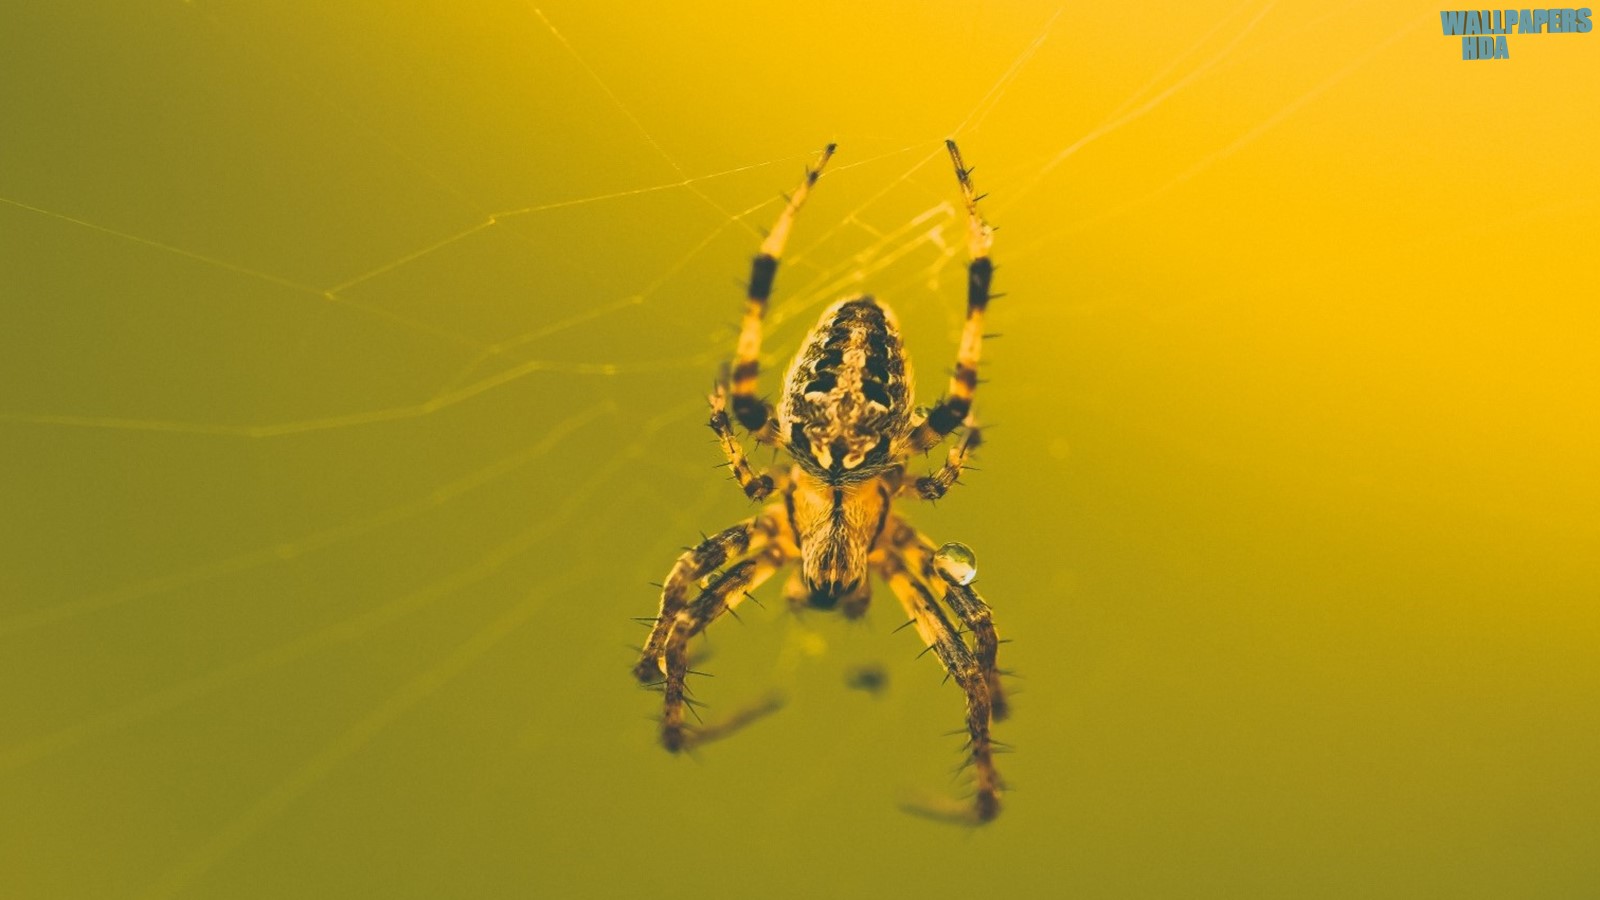 This awesome spider wallpaper 1600x900